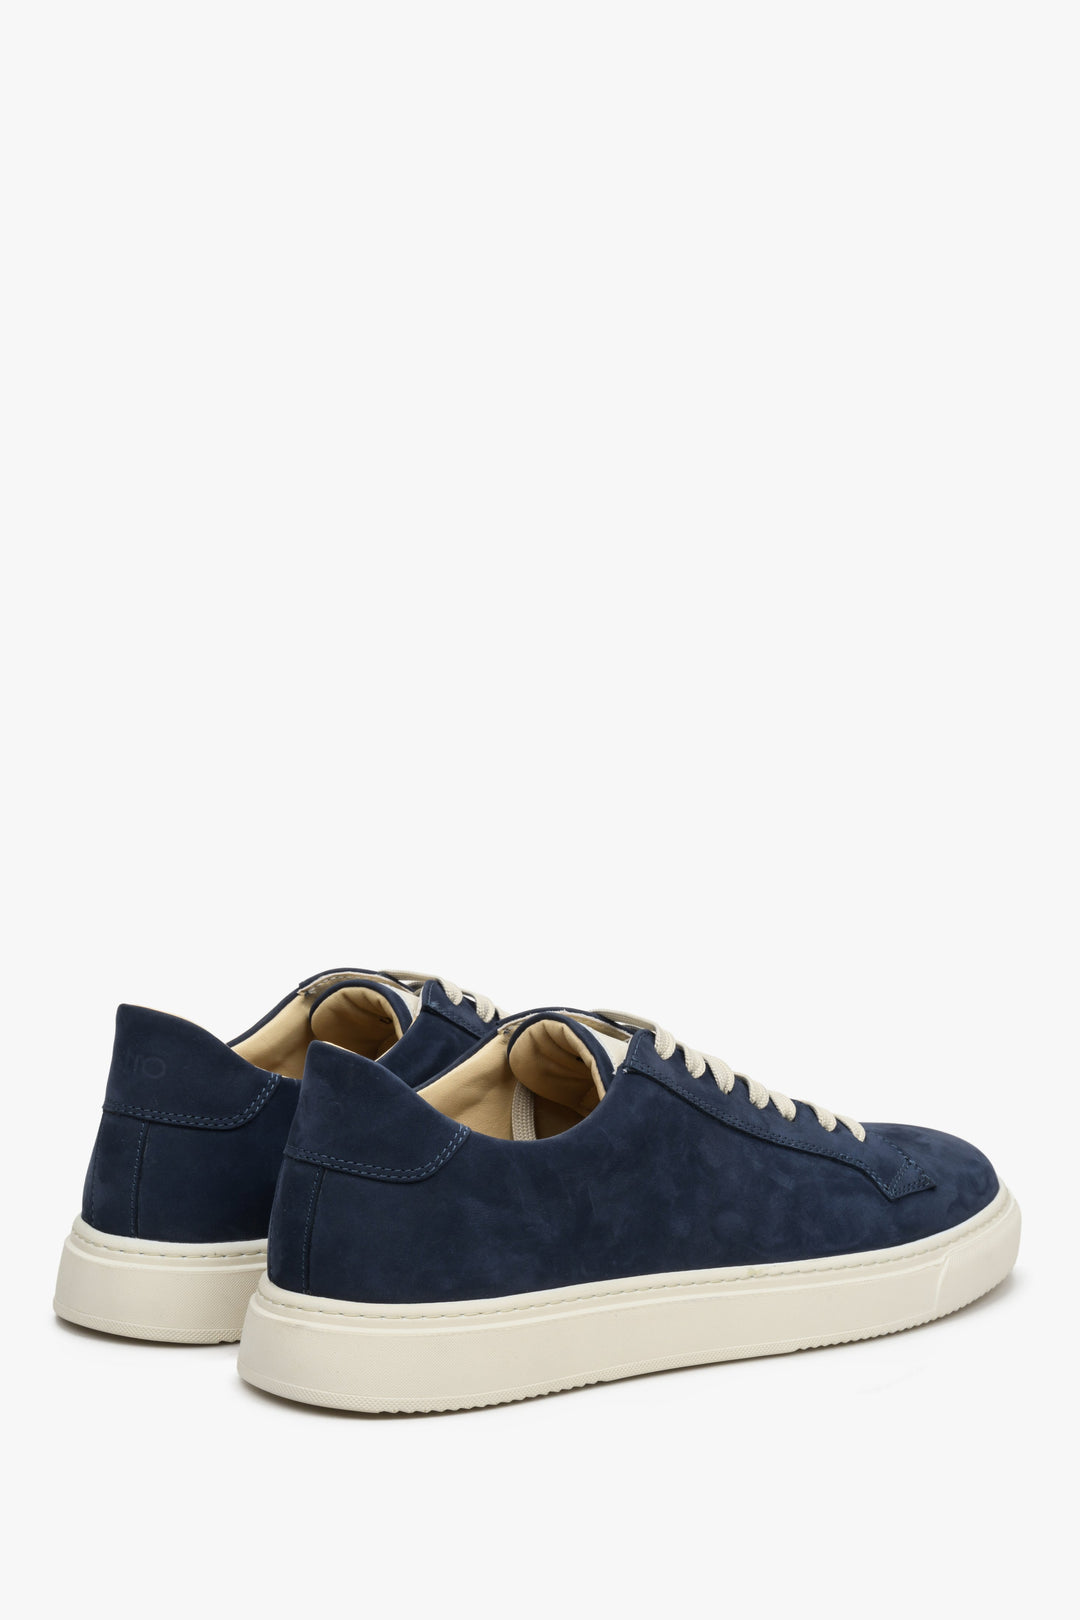 Navy blue nubuck men's sneakers for spring Estro - presentation of the sole and side seam.